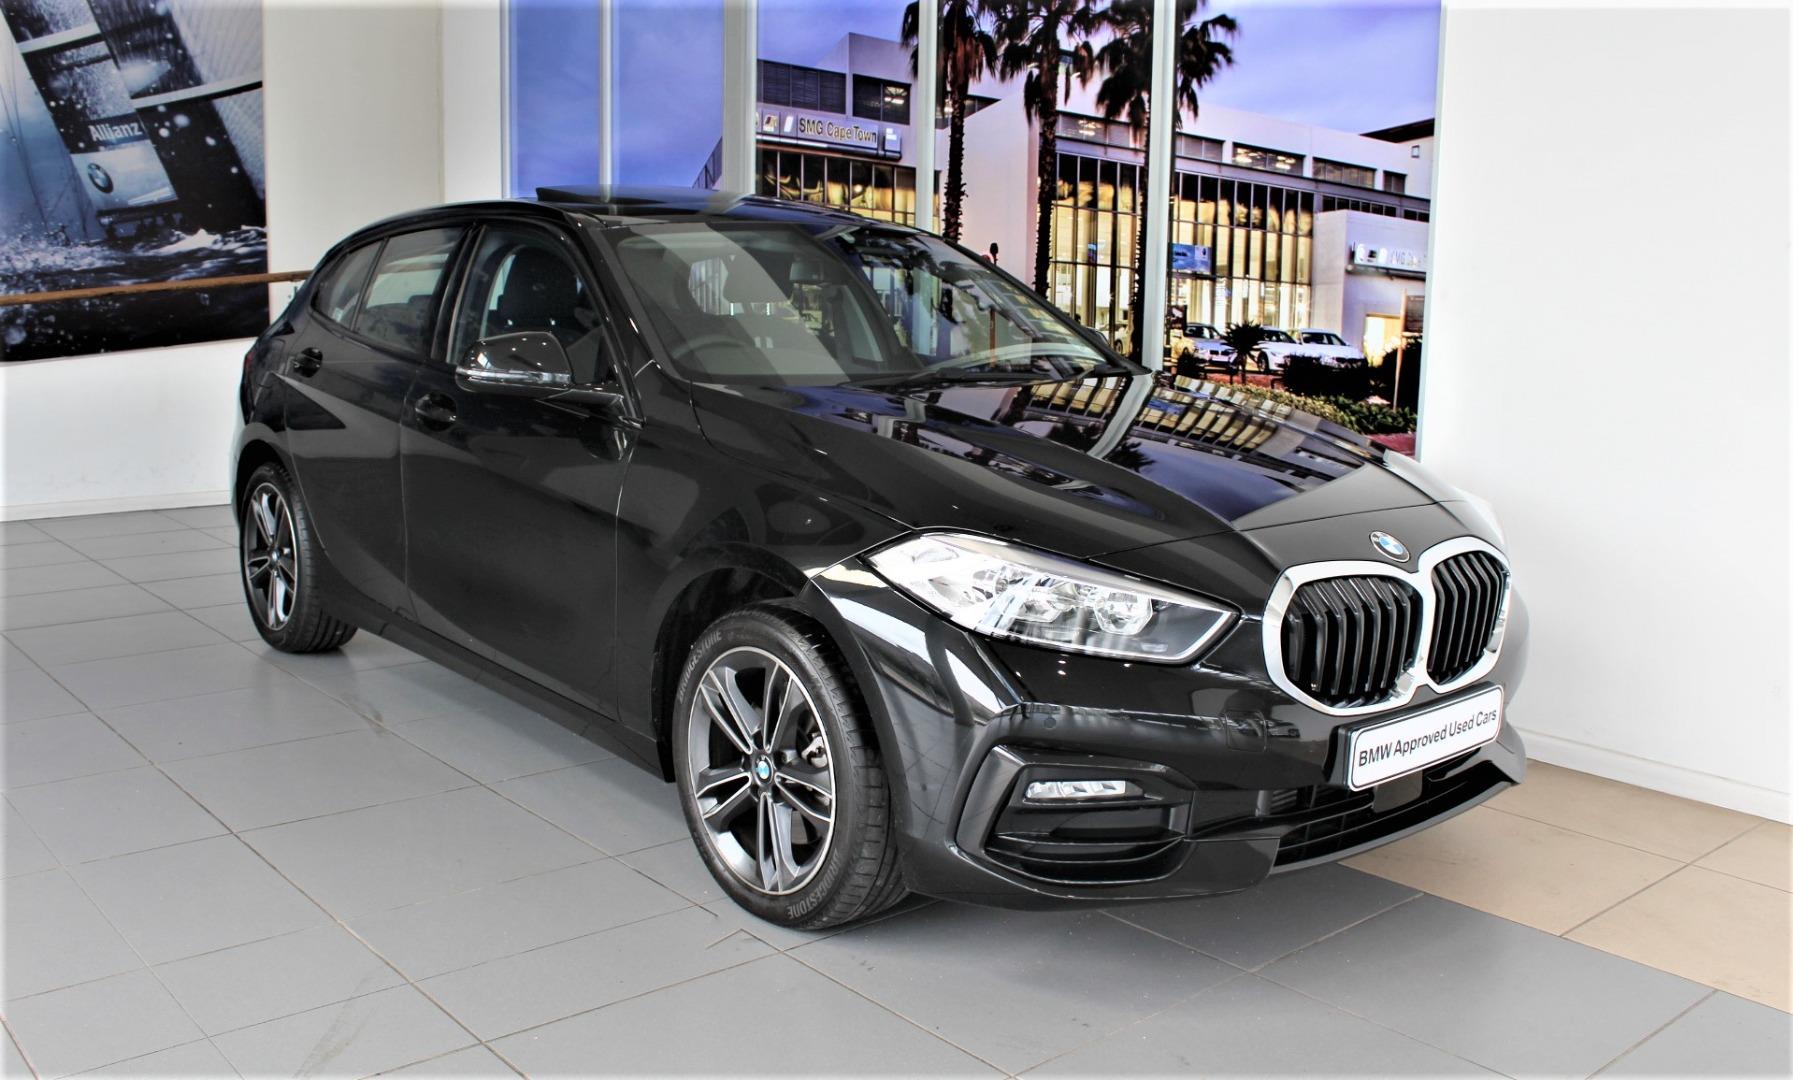 2020 BMW 118i SPORTLINE AT (F40)  for sale - SMG12|USED|115343